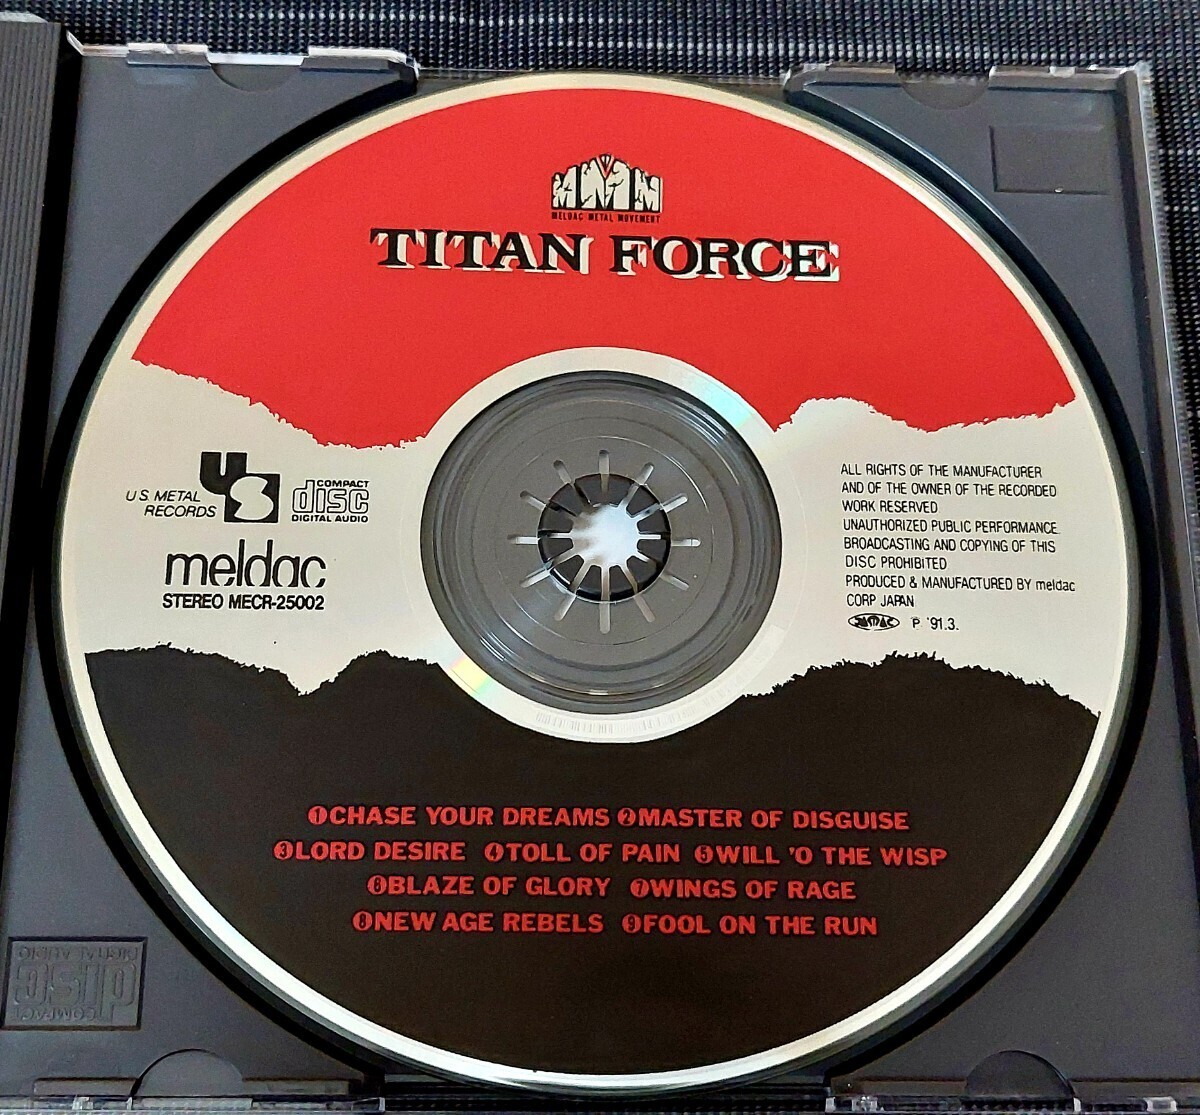 * with belt * Titan * force /TITAN FORCE domestic record records out of production 